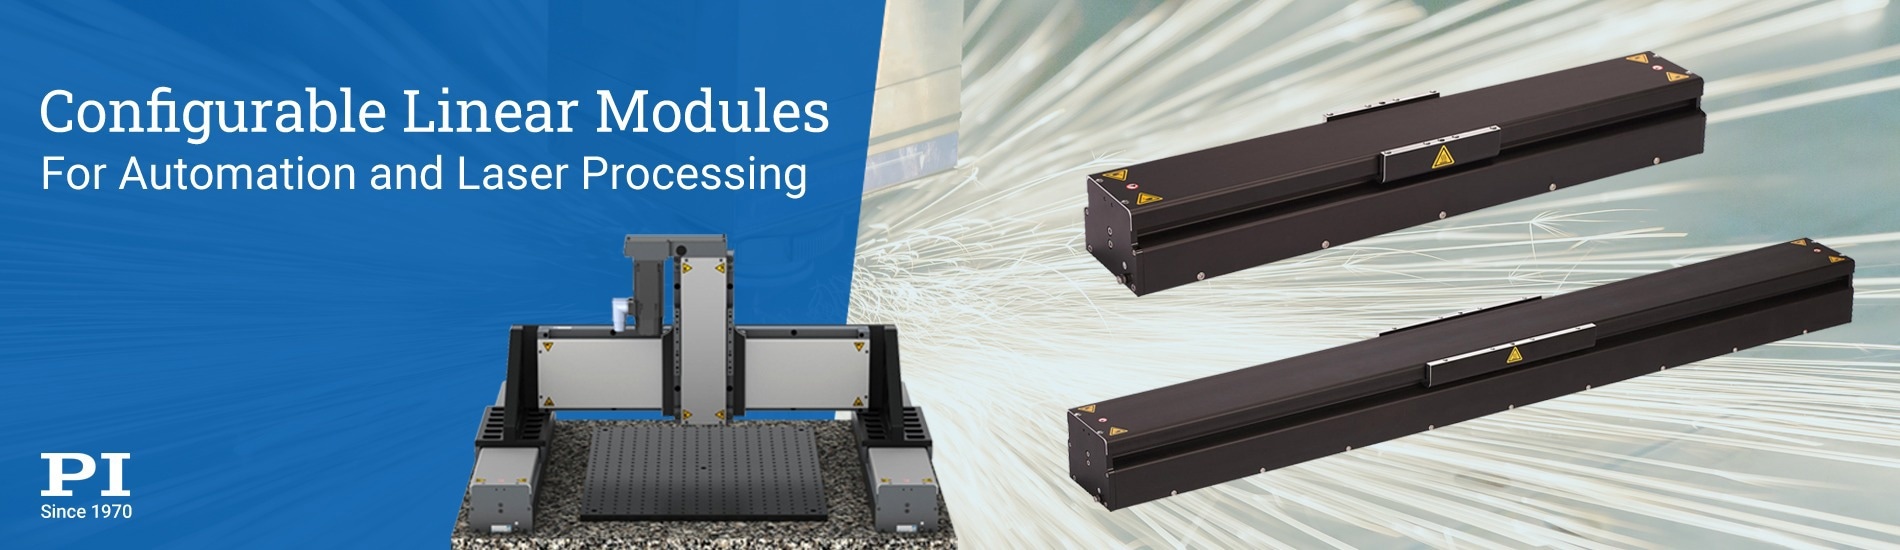 Direct-Drive Linear Stages for Automation and Laser Processing